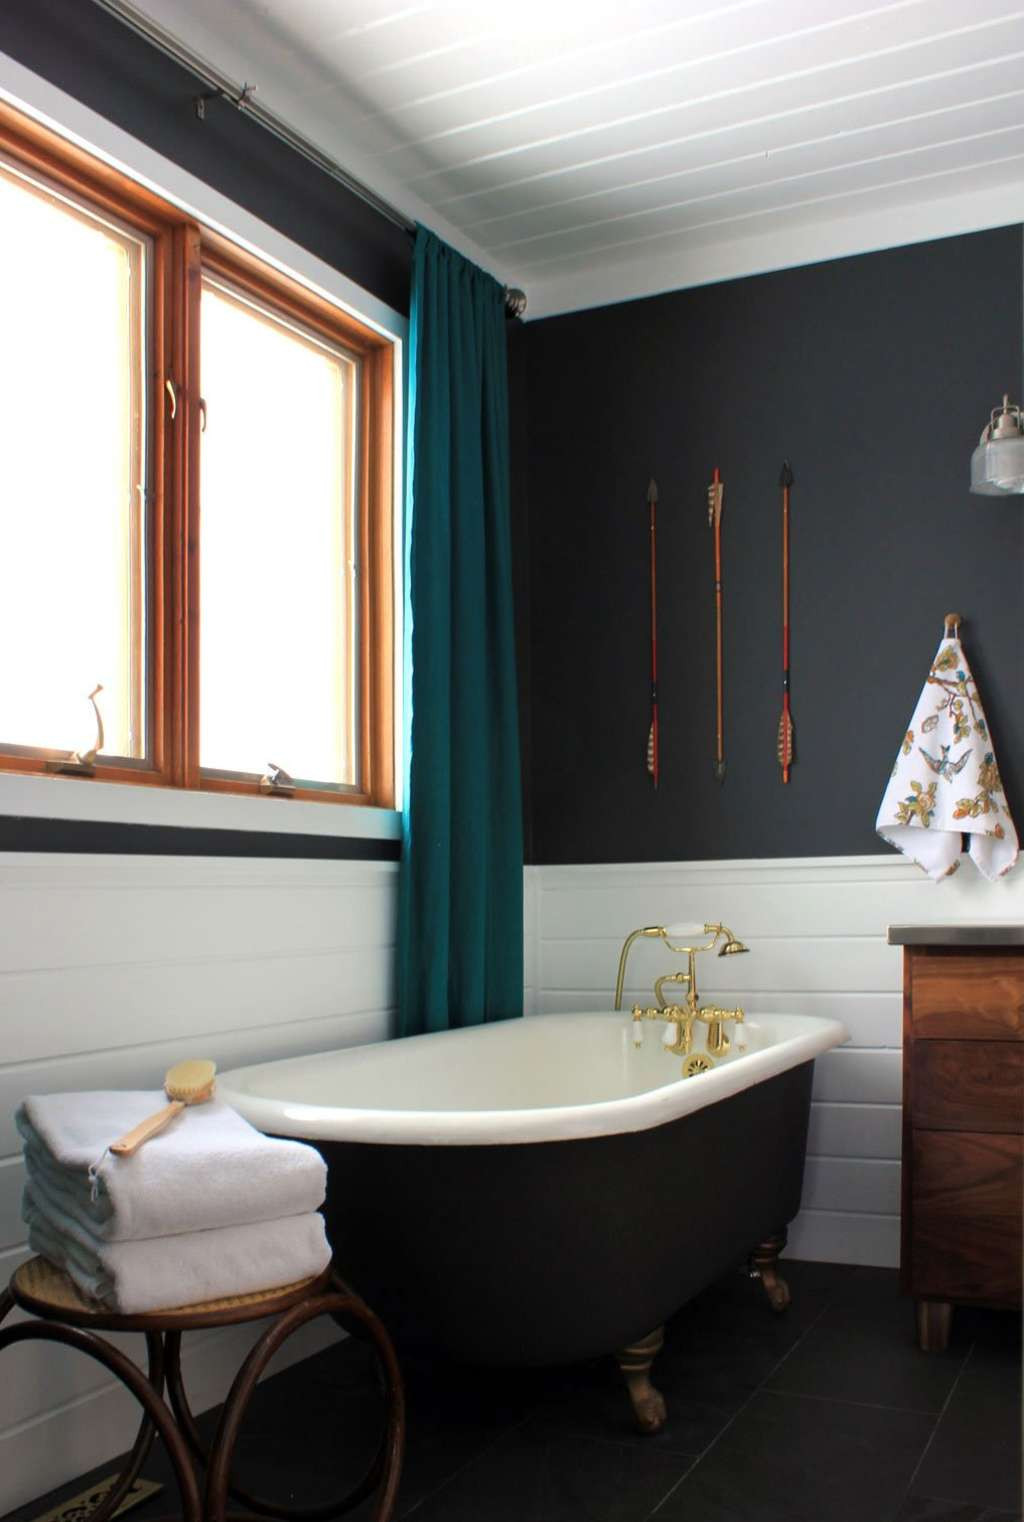 Popular Paint Colors For Bathrooms
 Best Paint Colors for Small Bathrooms